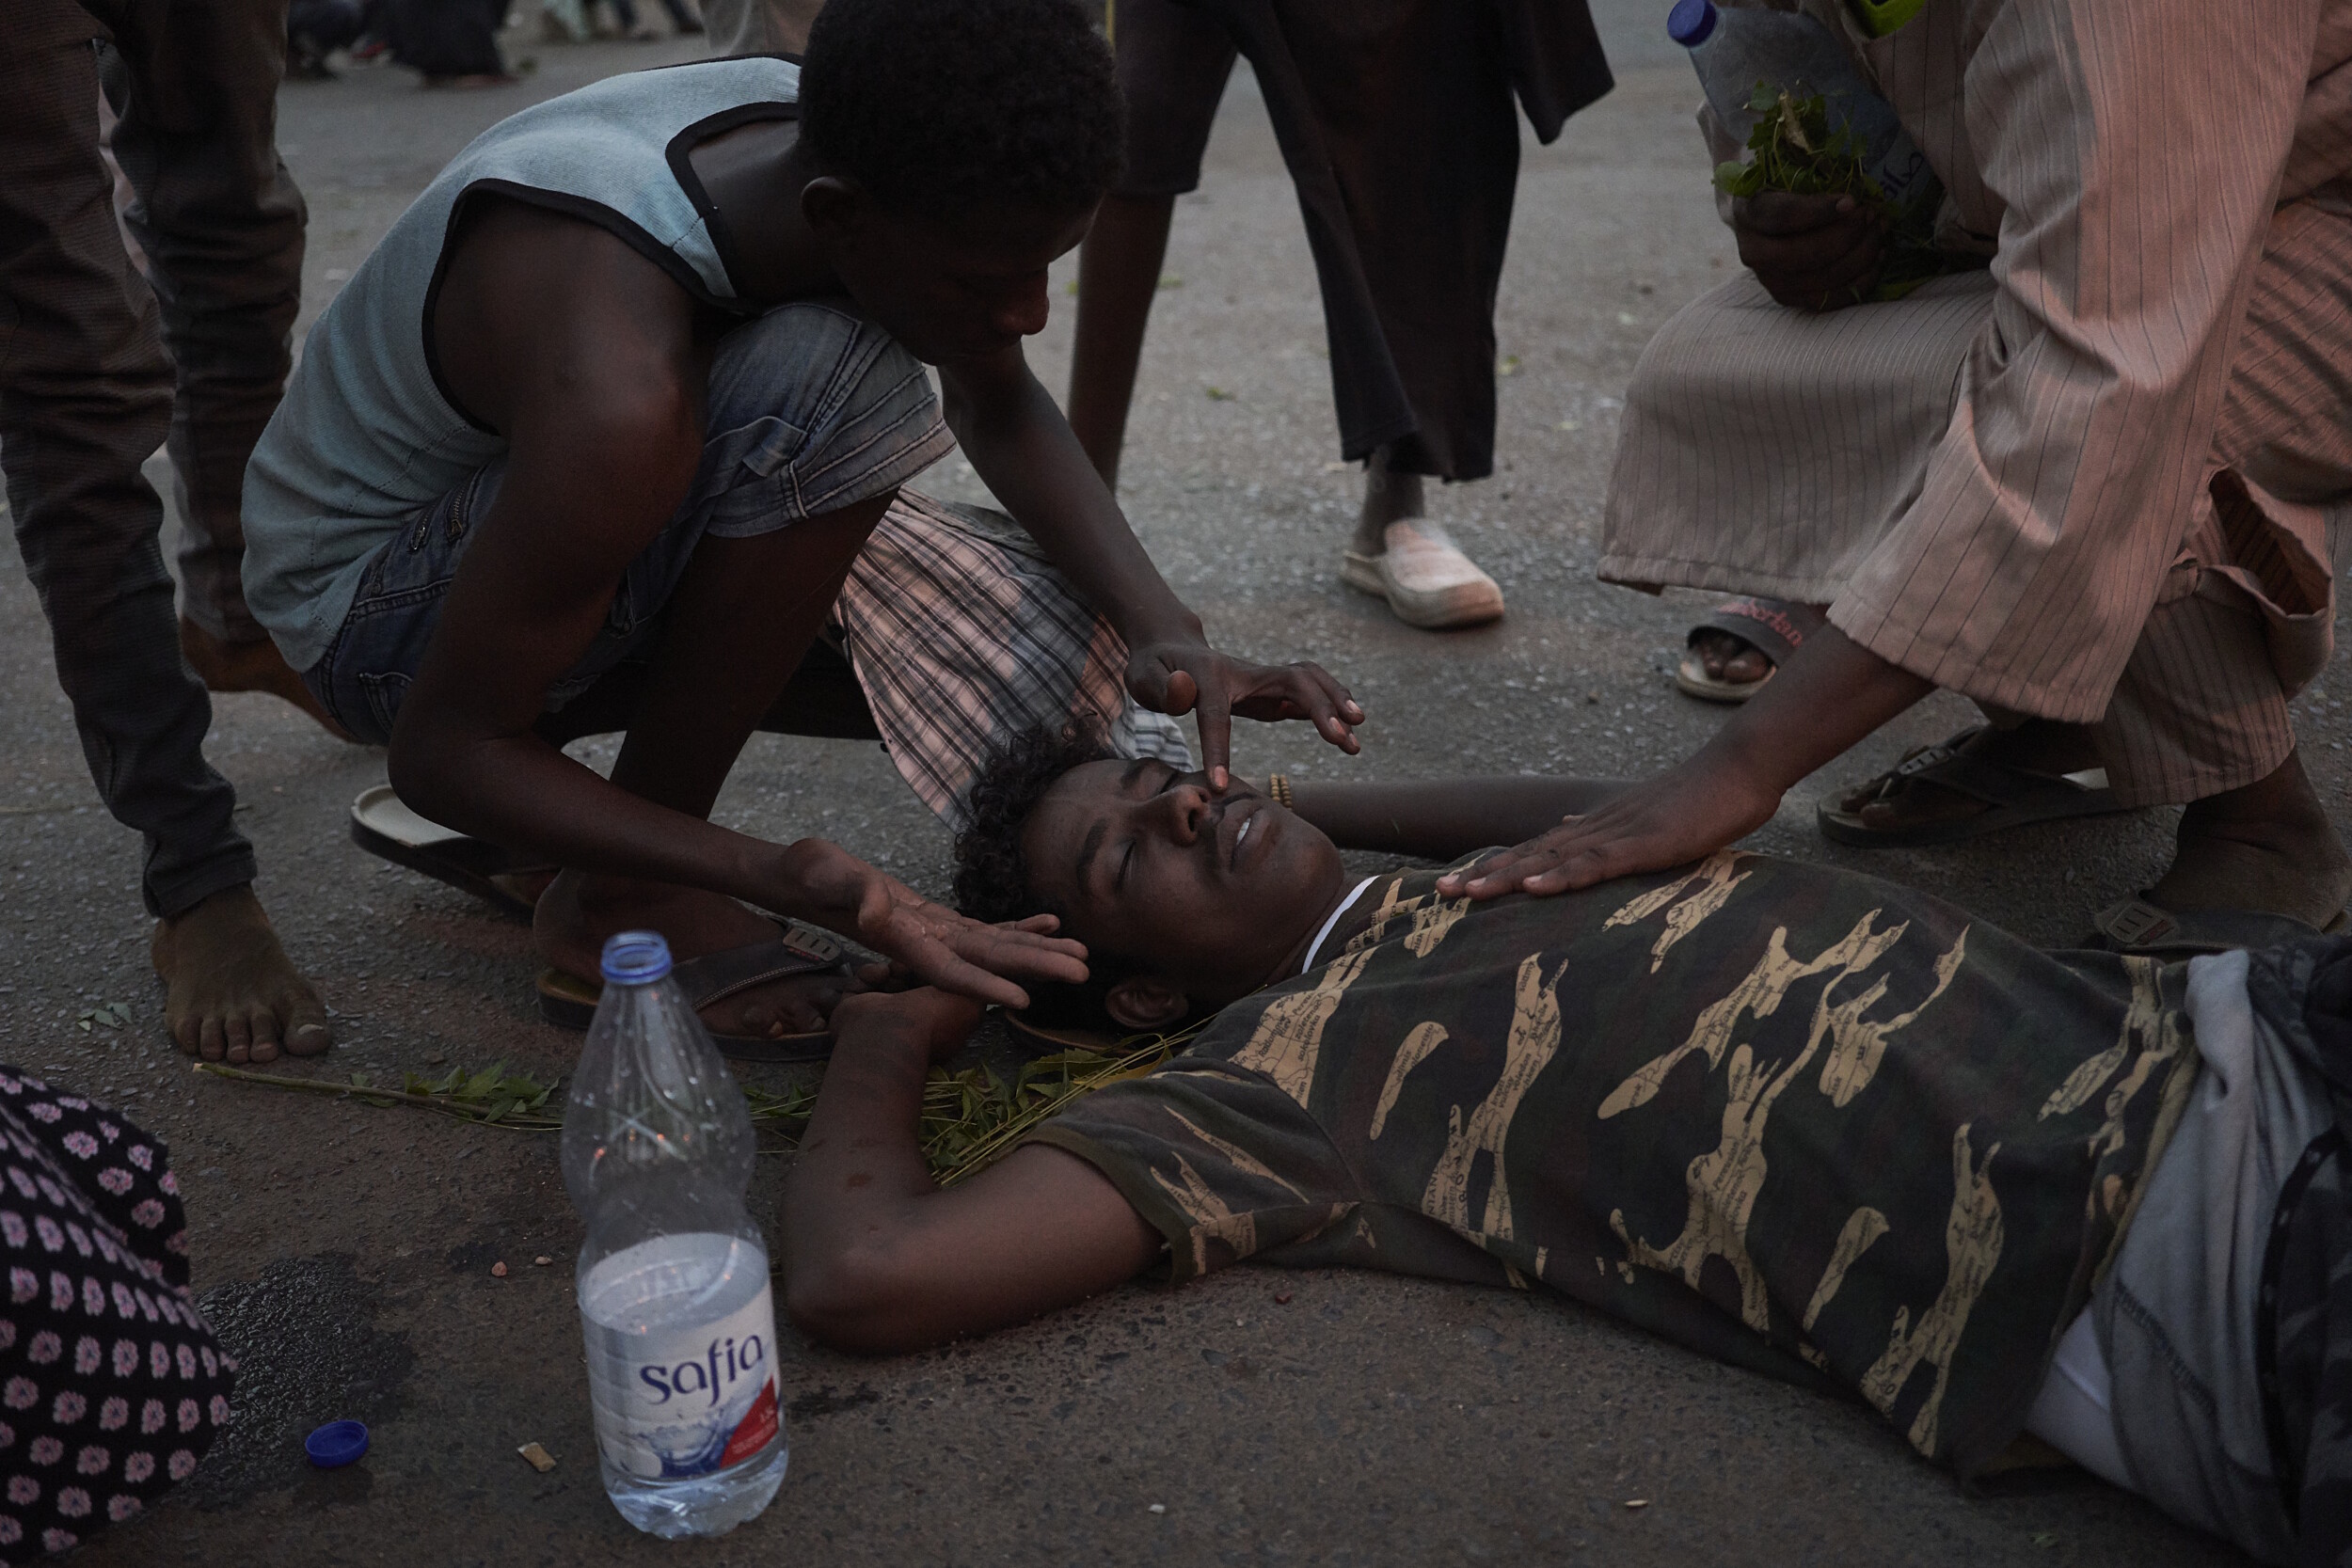 A protesters faints from tear gas